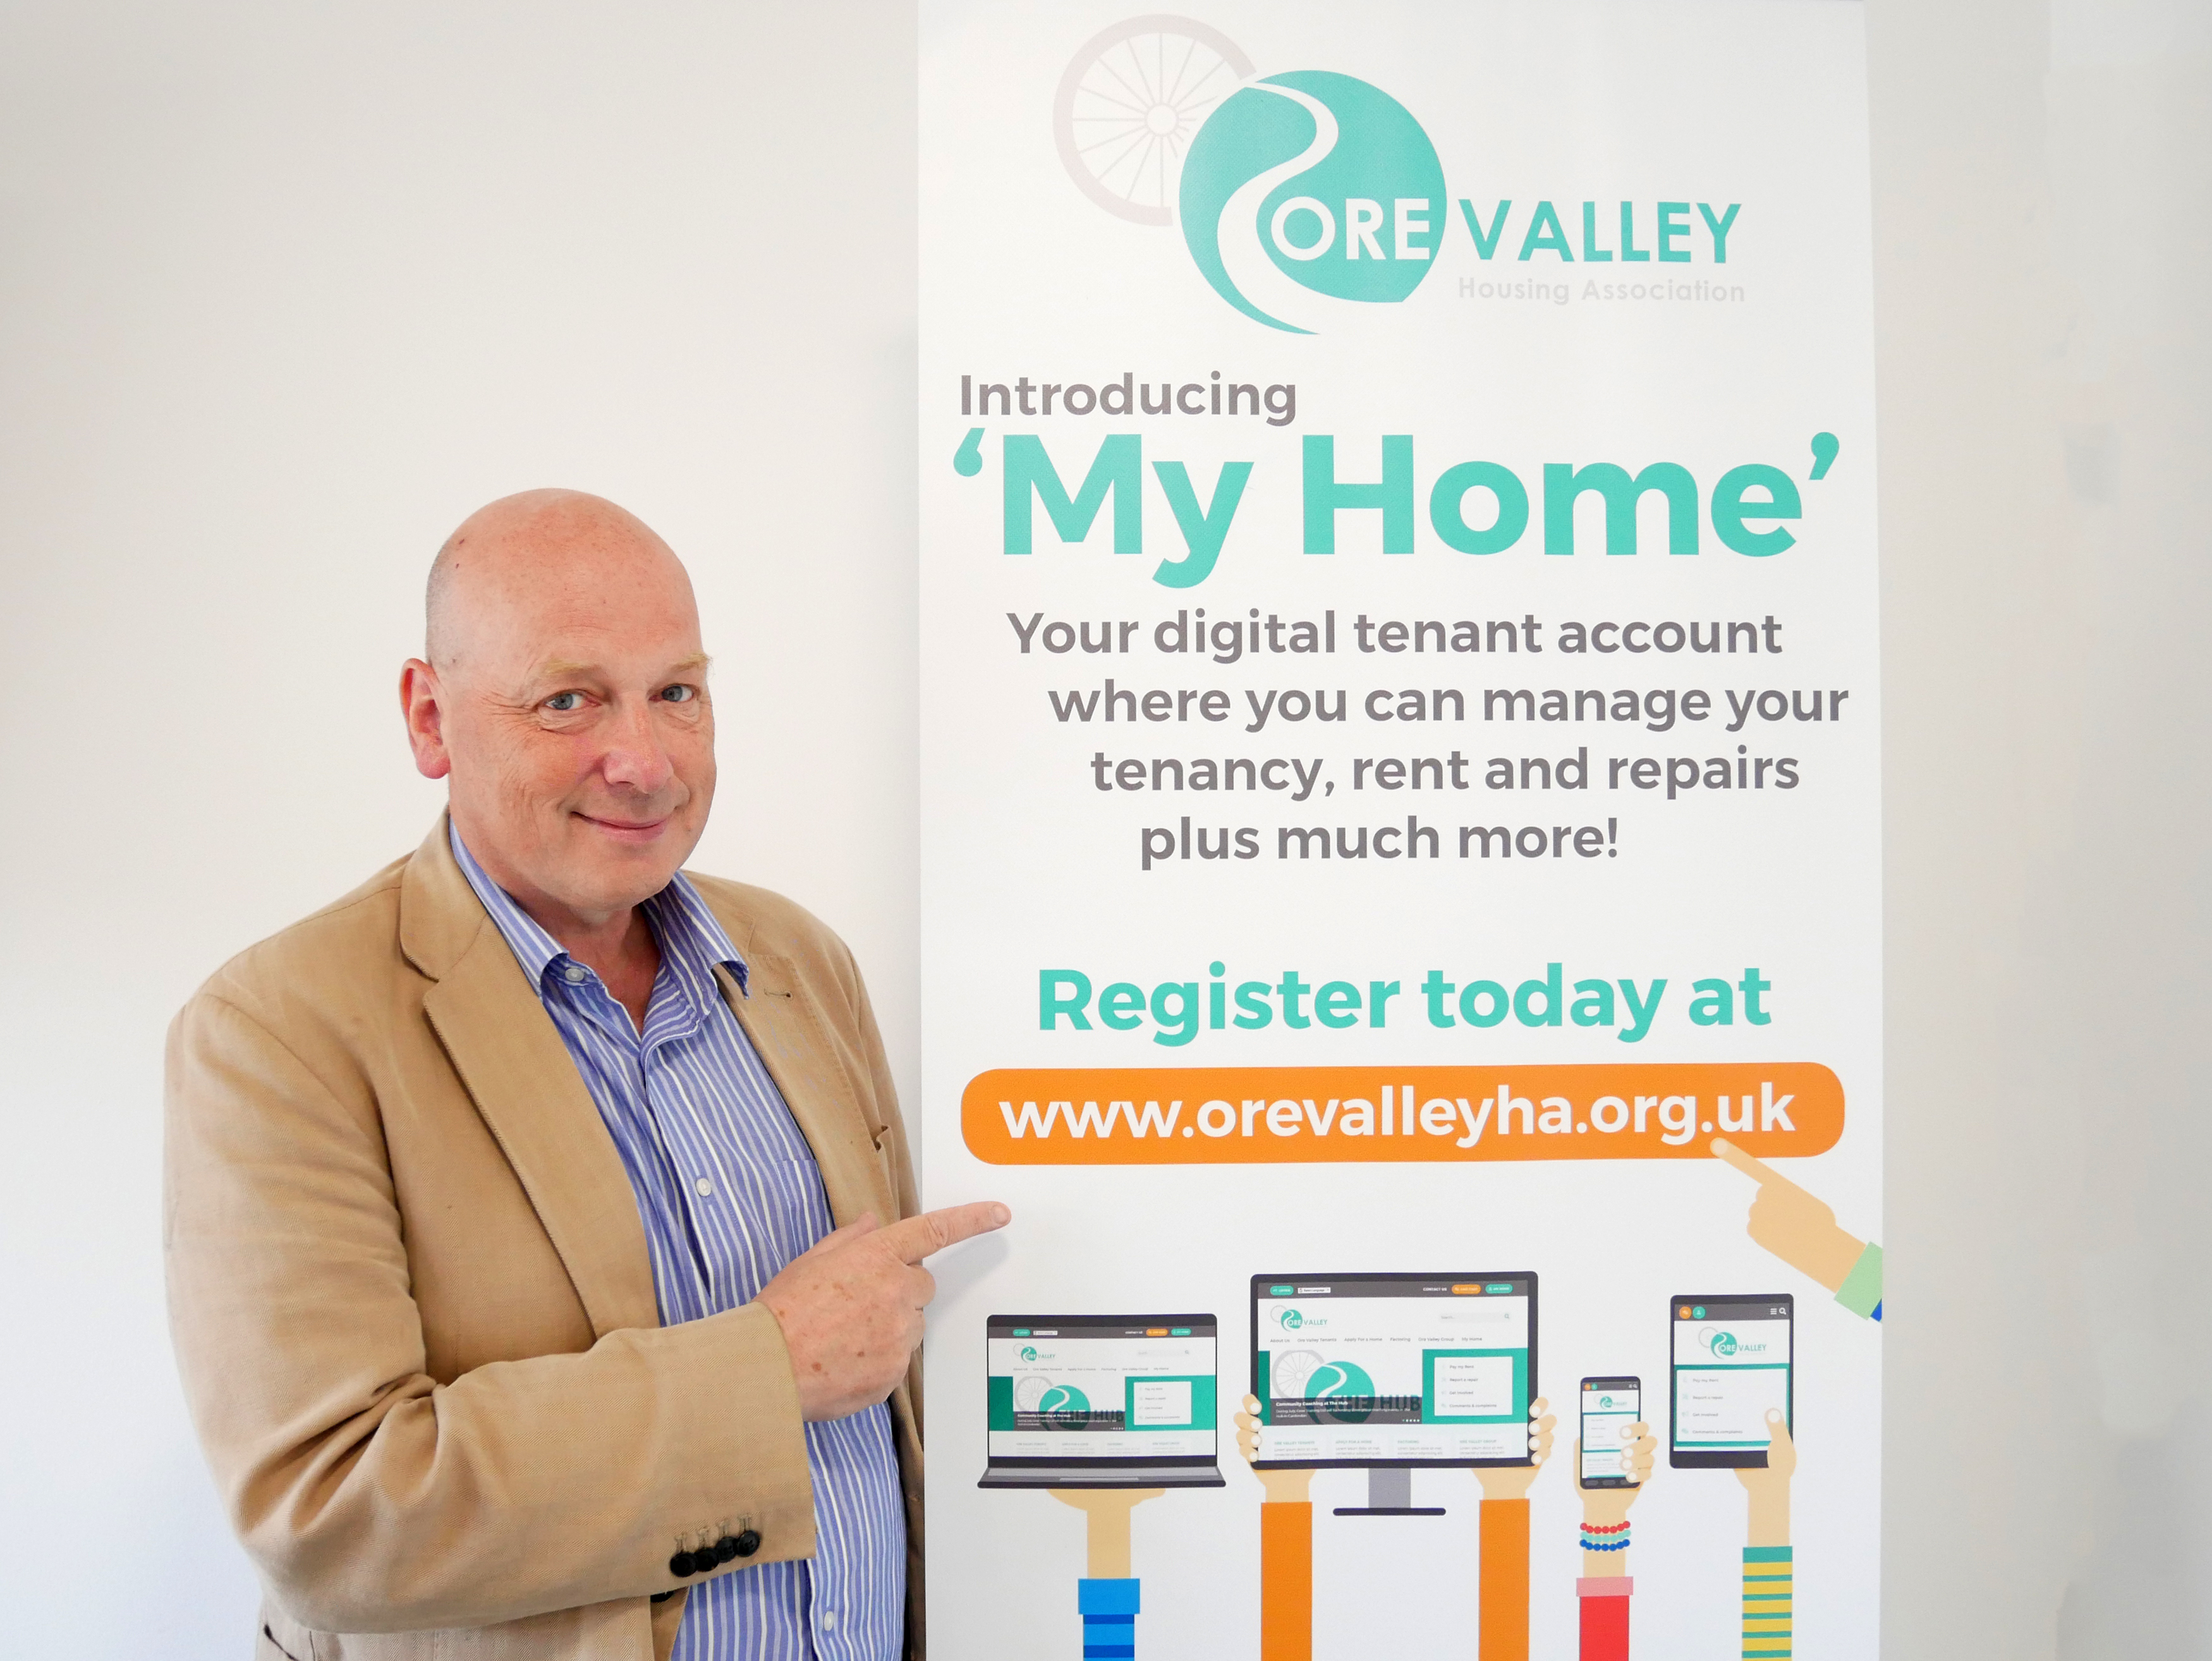 Ore Valley launches revamped website and tenant portal